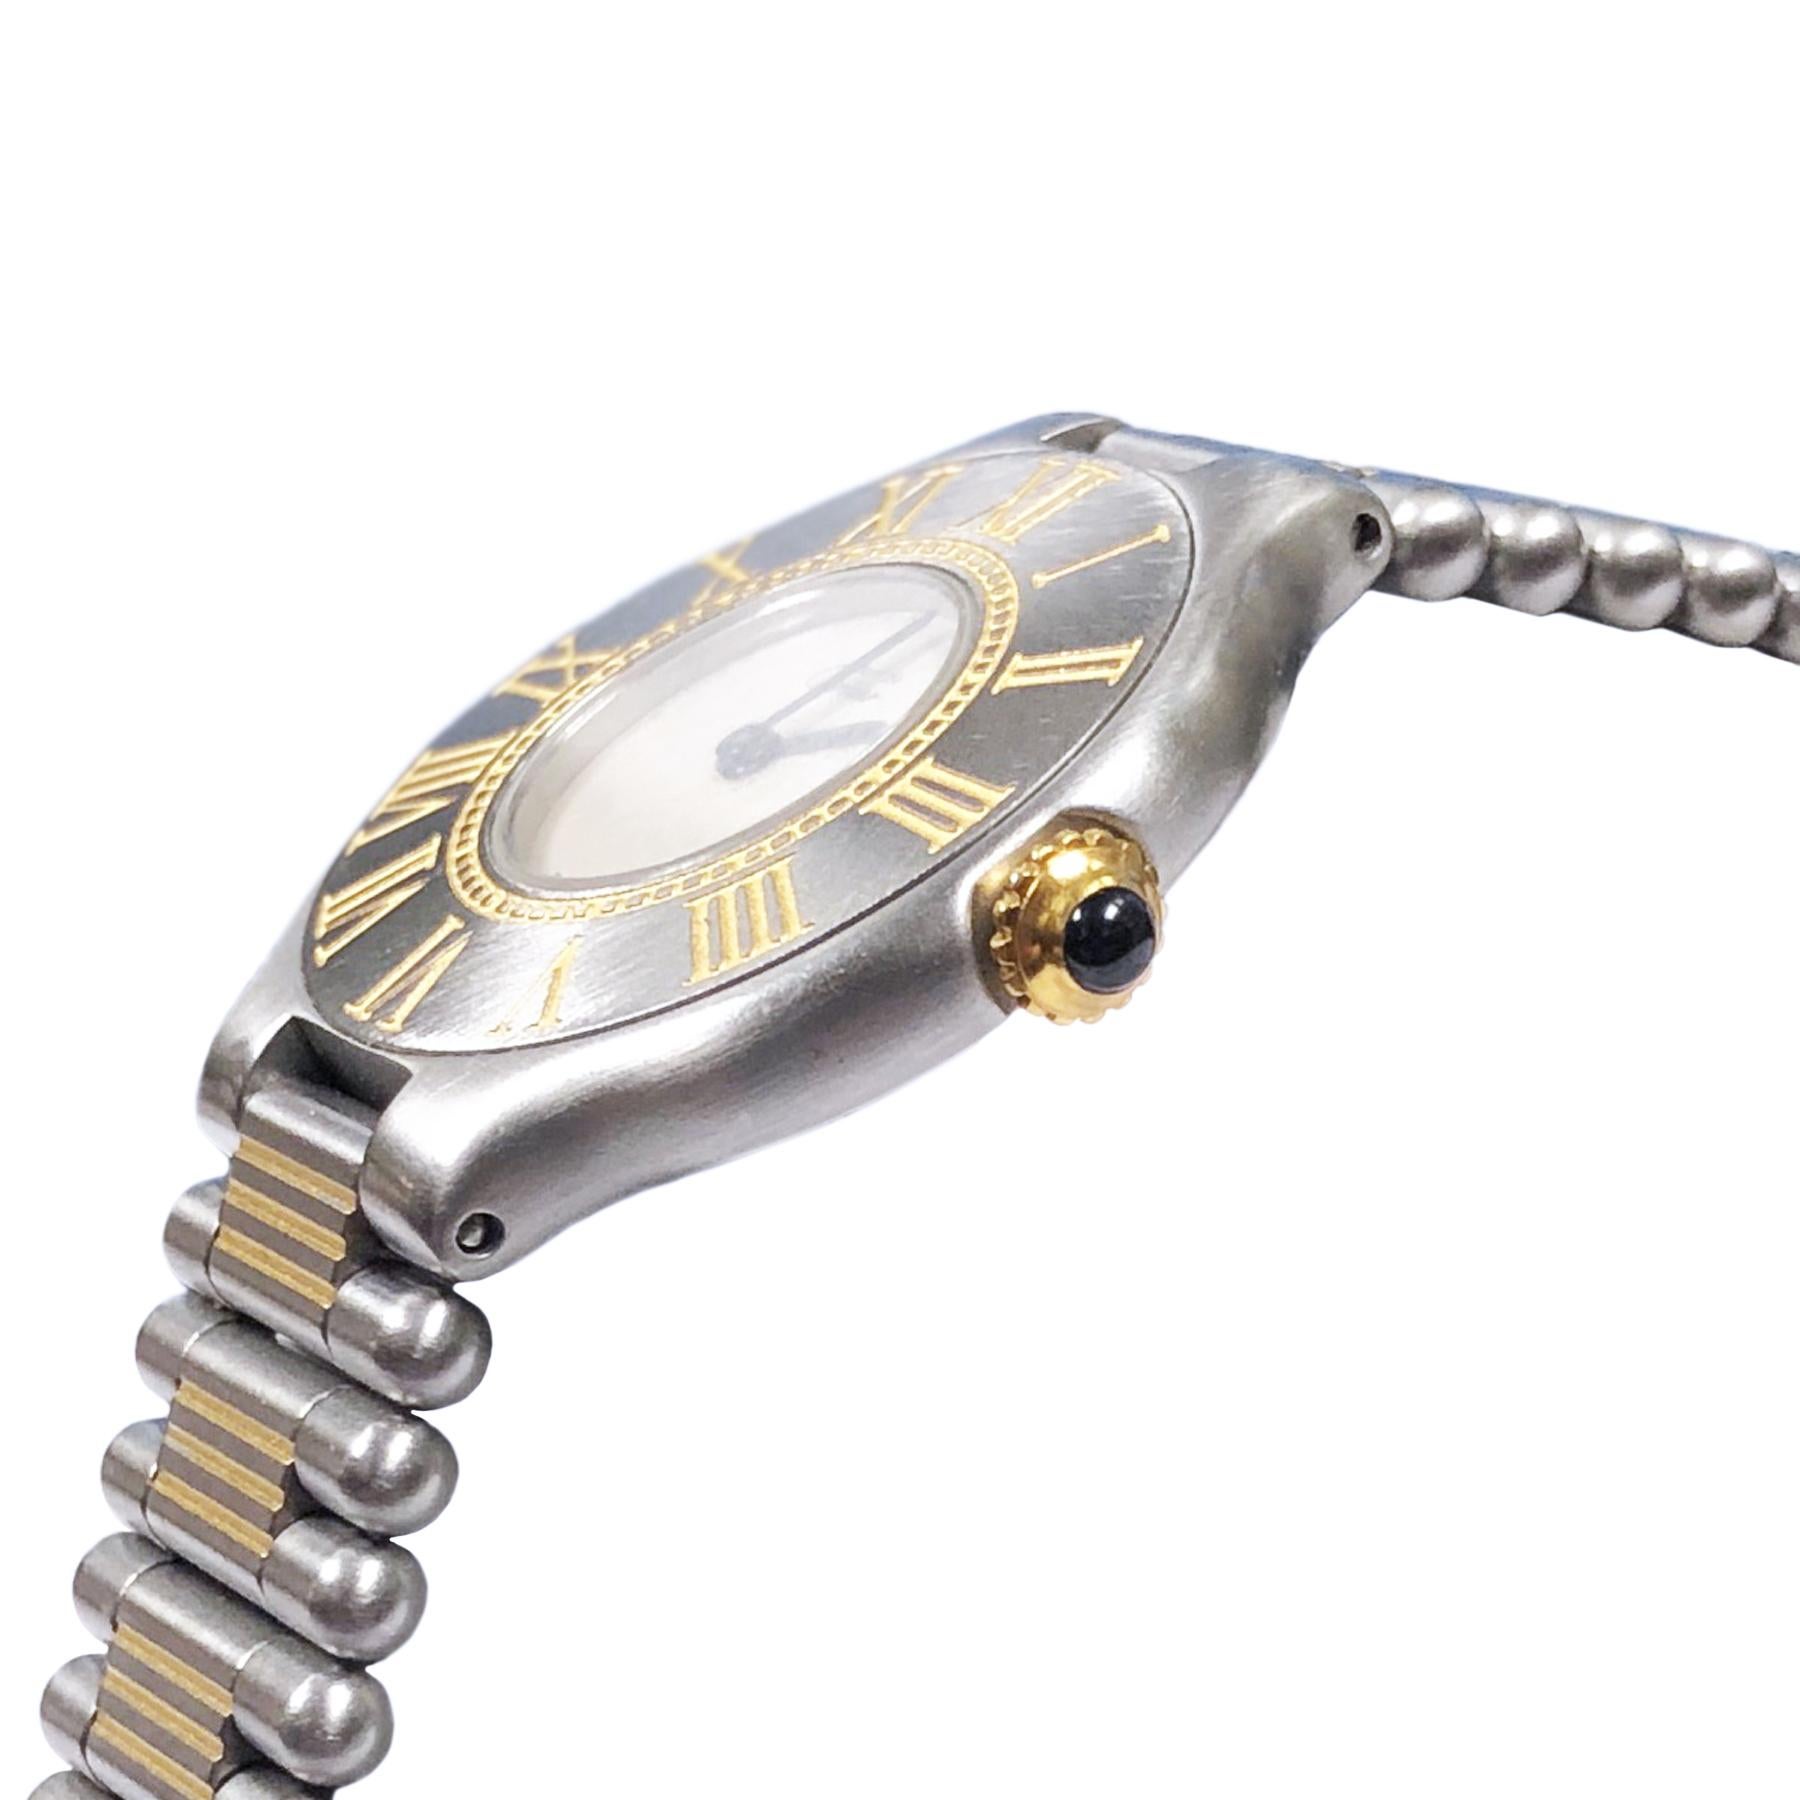 Circa 1990s Cartier, Must De Cartier 21 Ladies Wrist watch, 28 MM Stainless Steel with Gold accents case and a Gold crown set with a sapphire. Quartz Movement, Silver Dial. 5/8 inch wide Steel and Gold link bracelet with Deployment clasp. Total